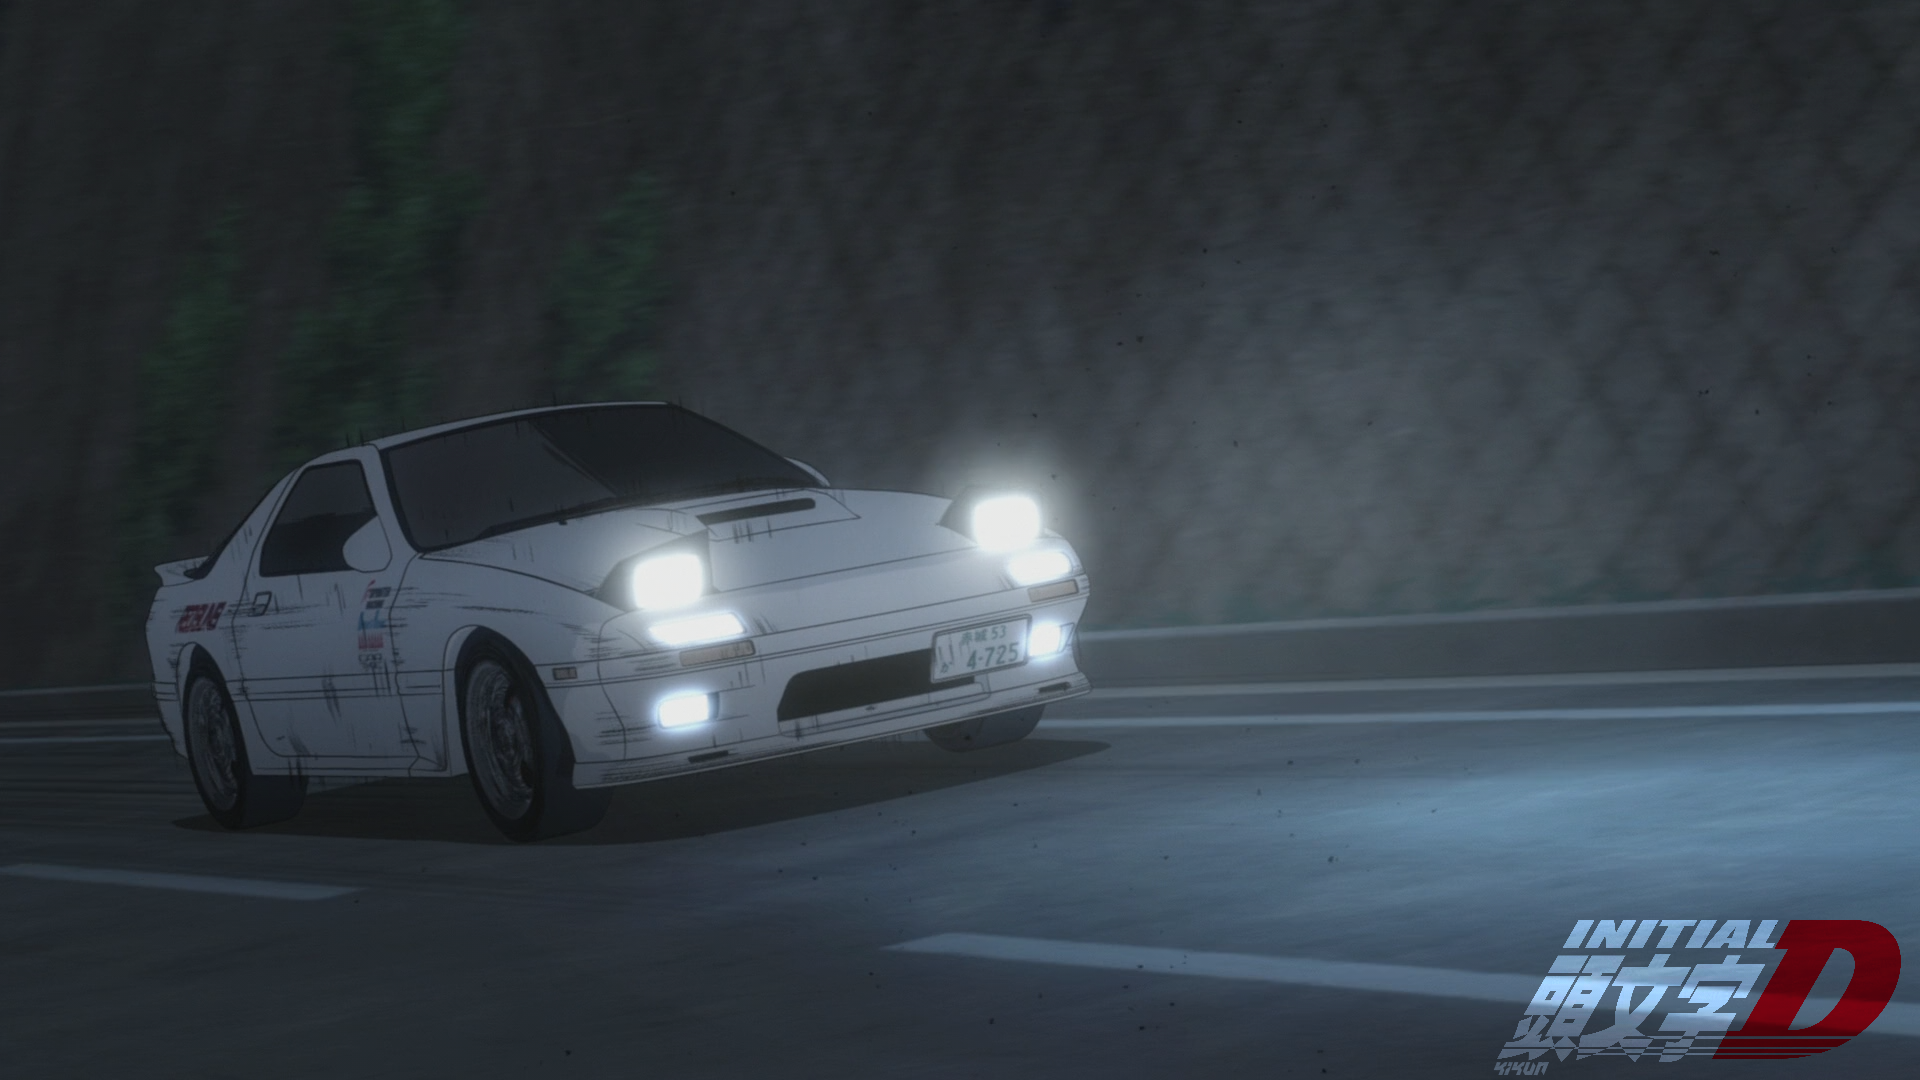 Initial D Wallpaper Collection [Part 1]